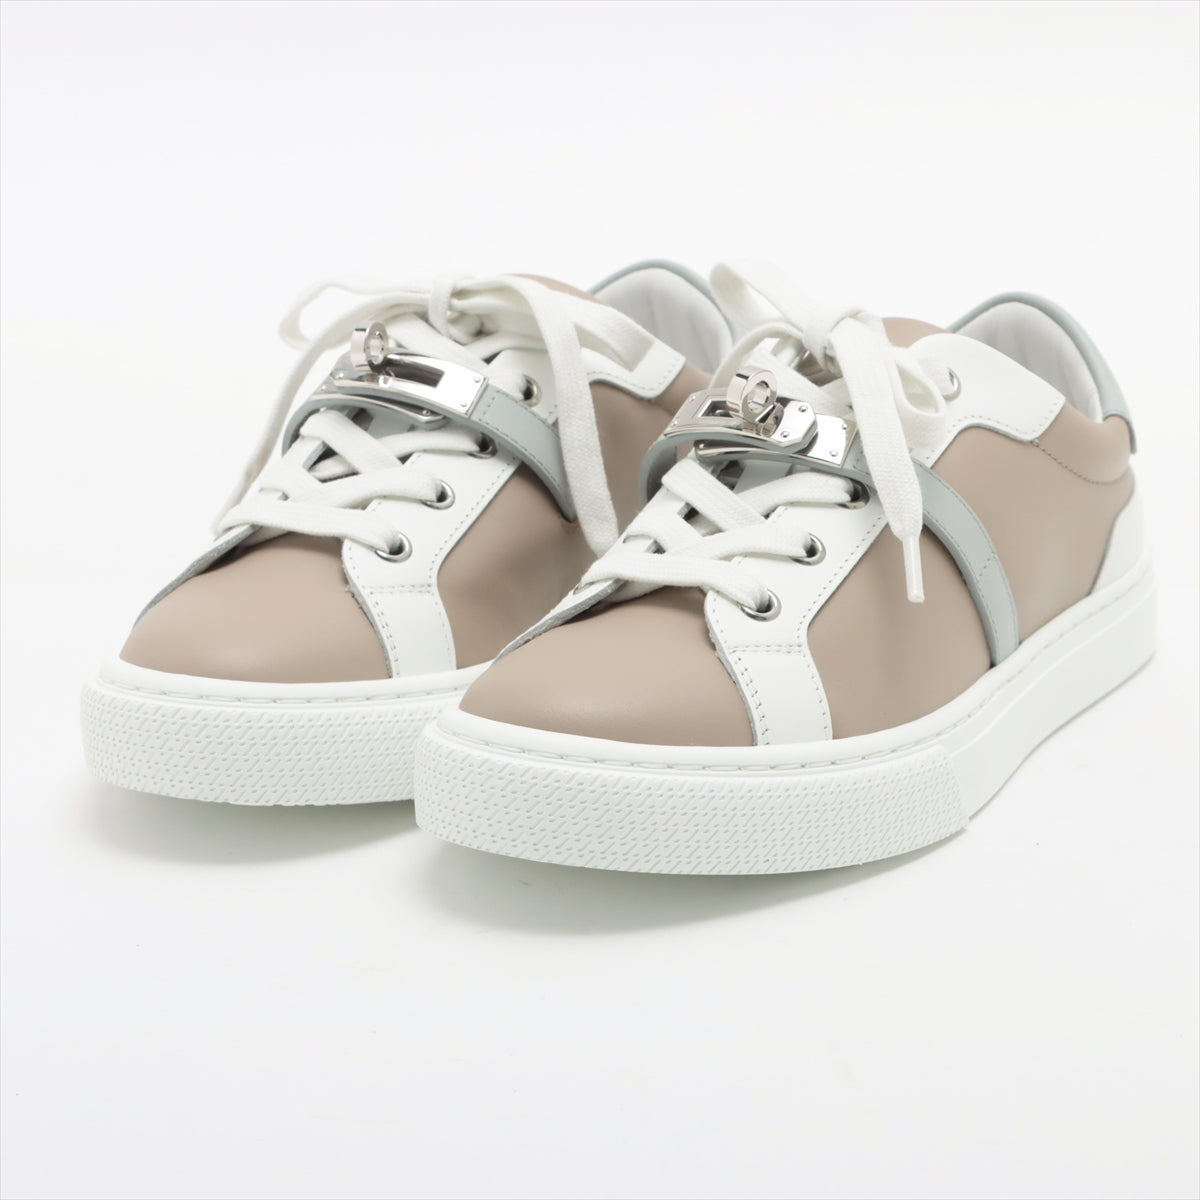 Hermès Leather Sneakers 35 Ladies' White x beige Day Kelly metal fittings box sack There is a replacement string